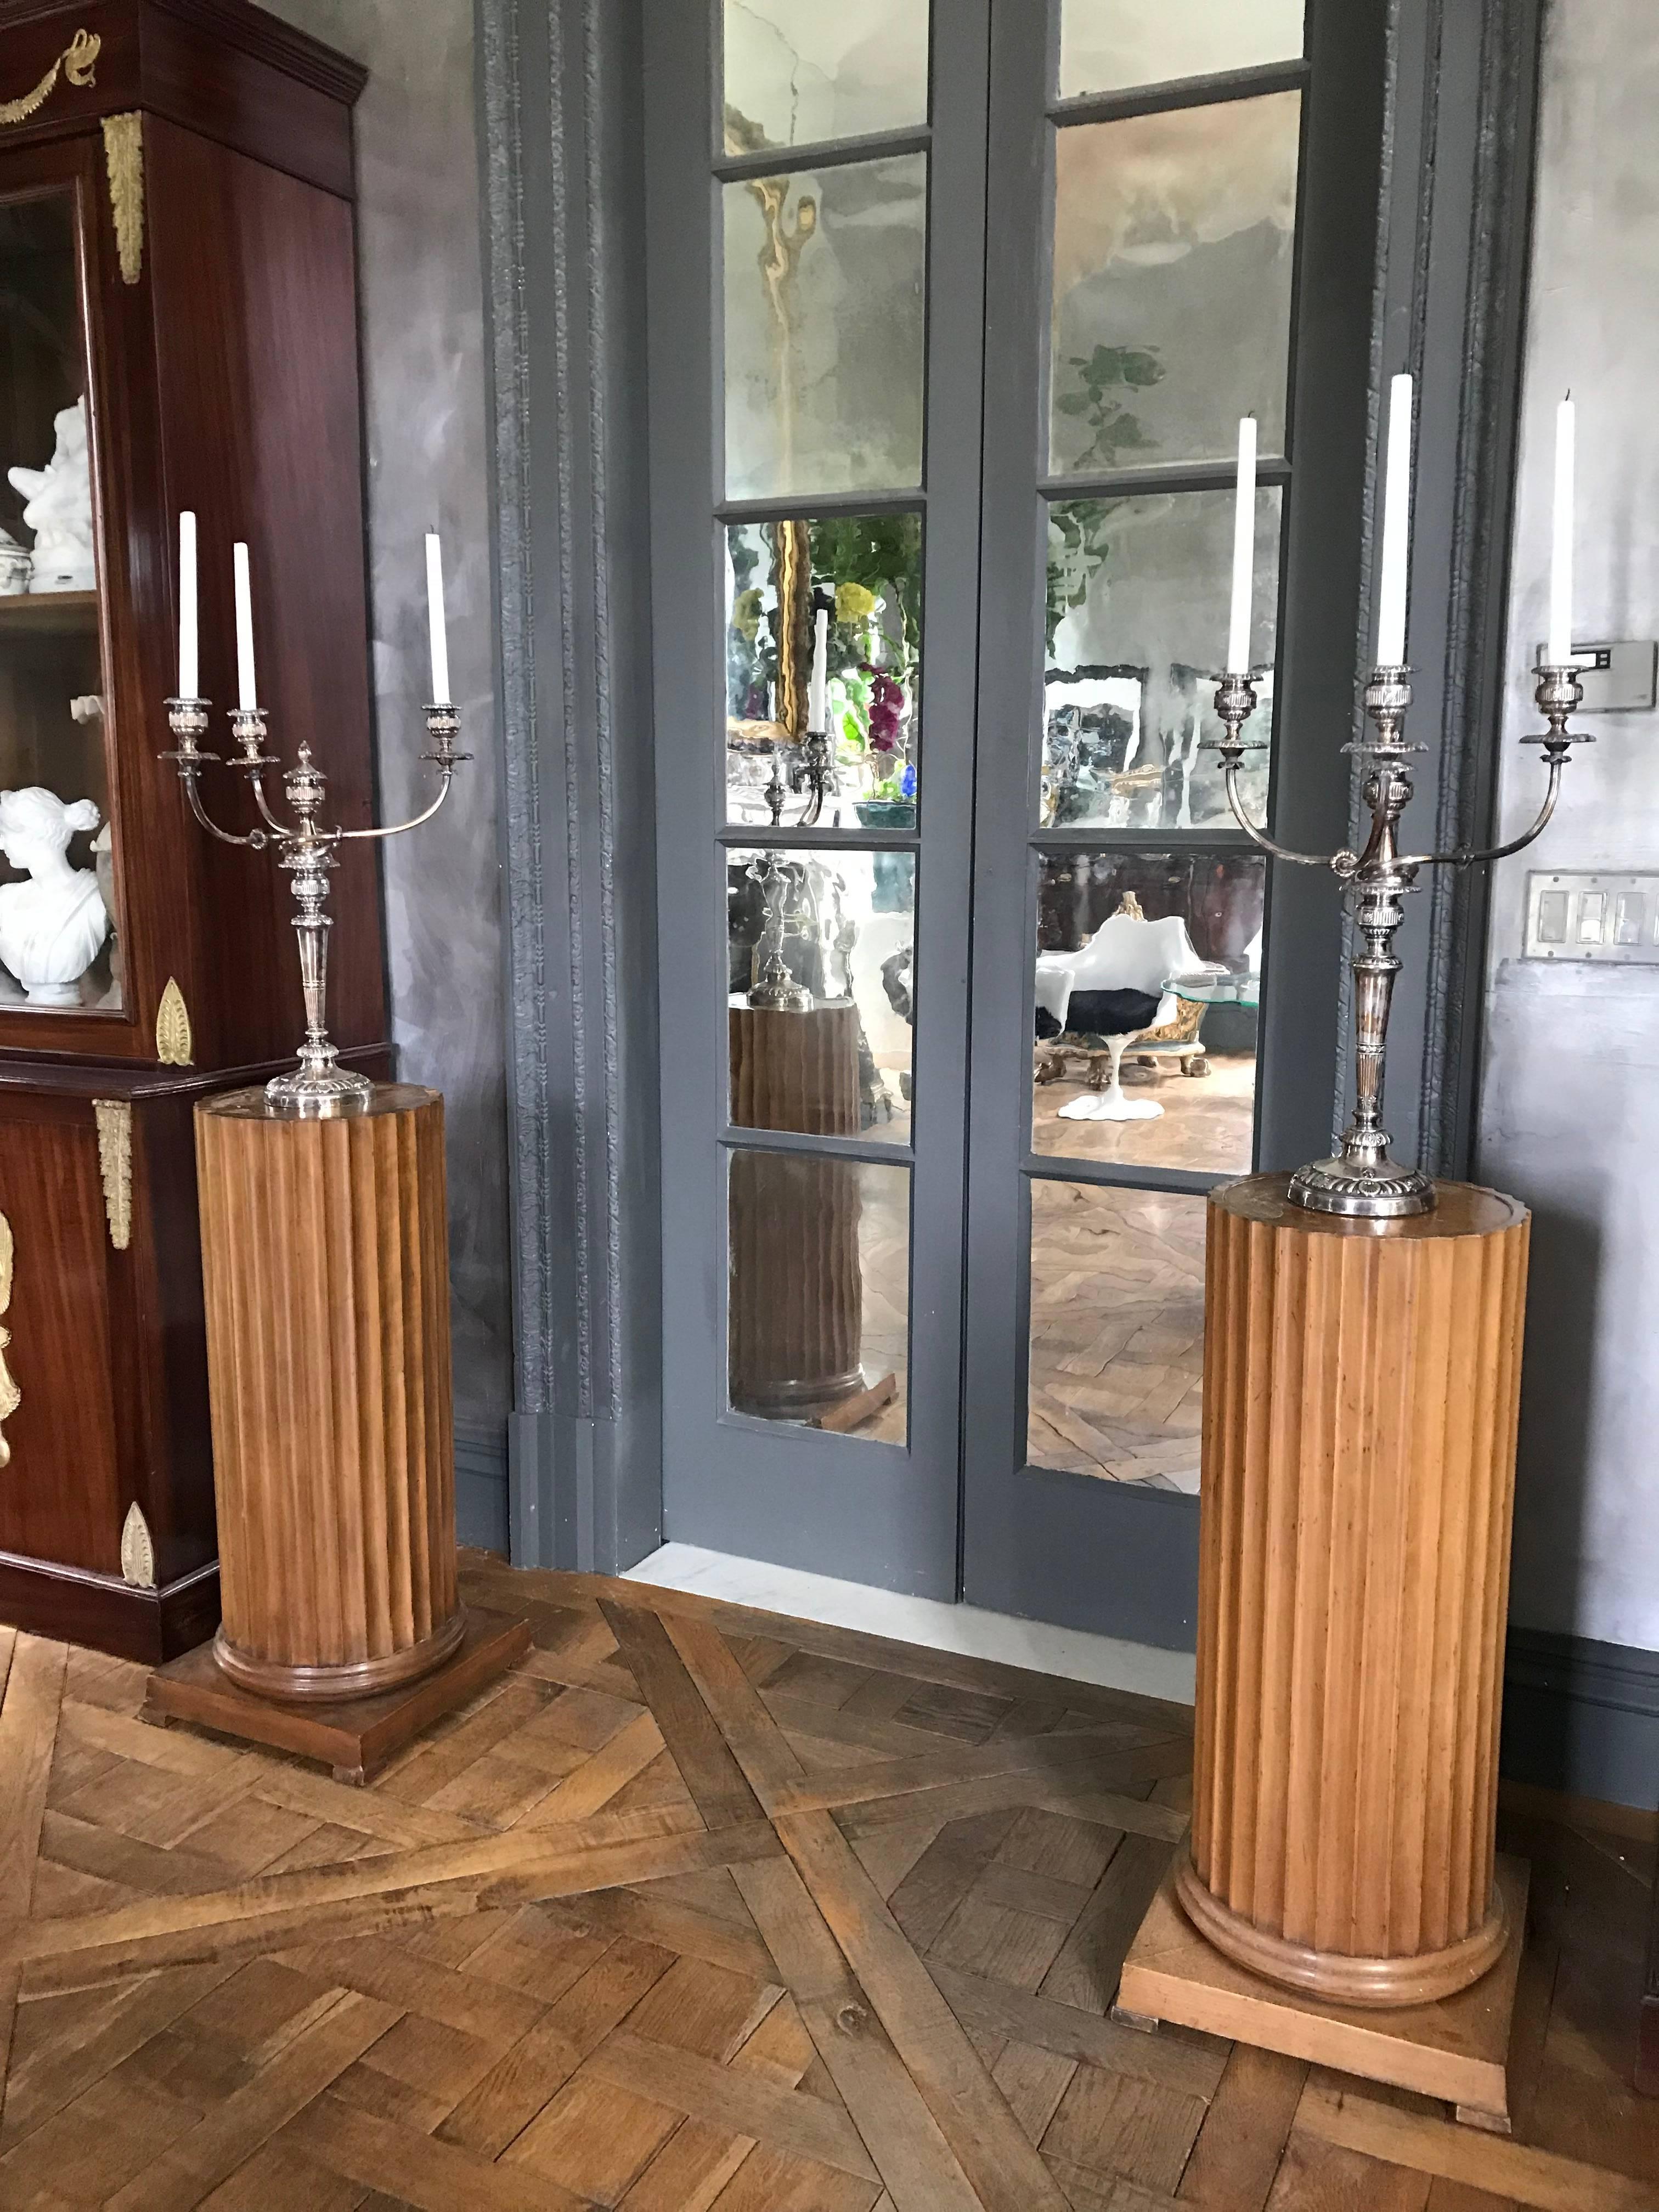 This fine pair of walnut column pedestals were made in the Art Deco period. The column is beautifully reeded and the top is veneered in burl walnut.